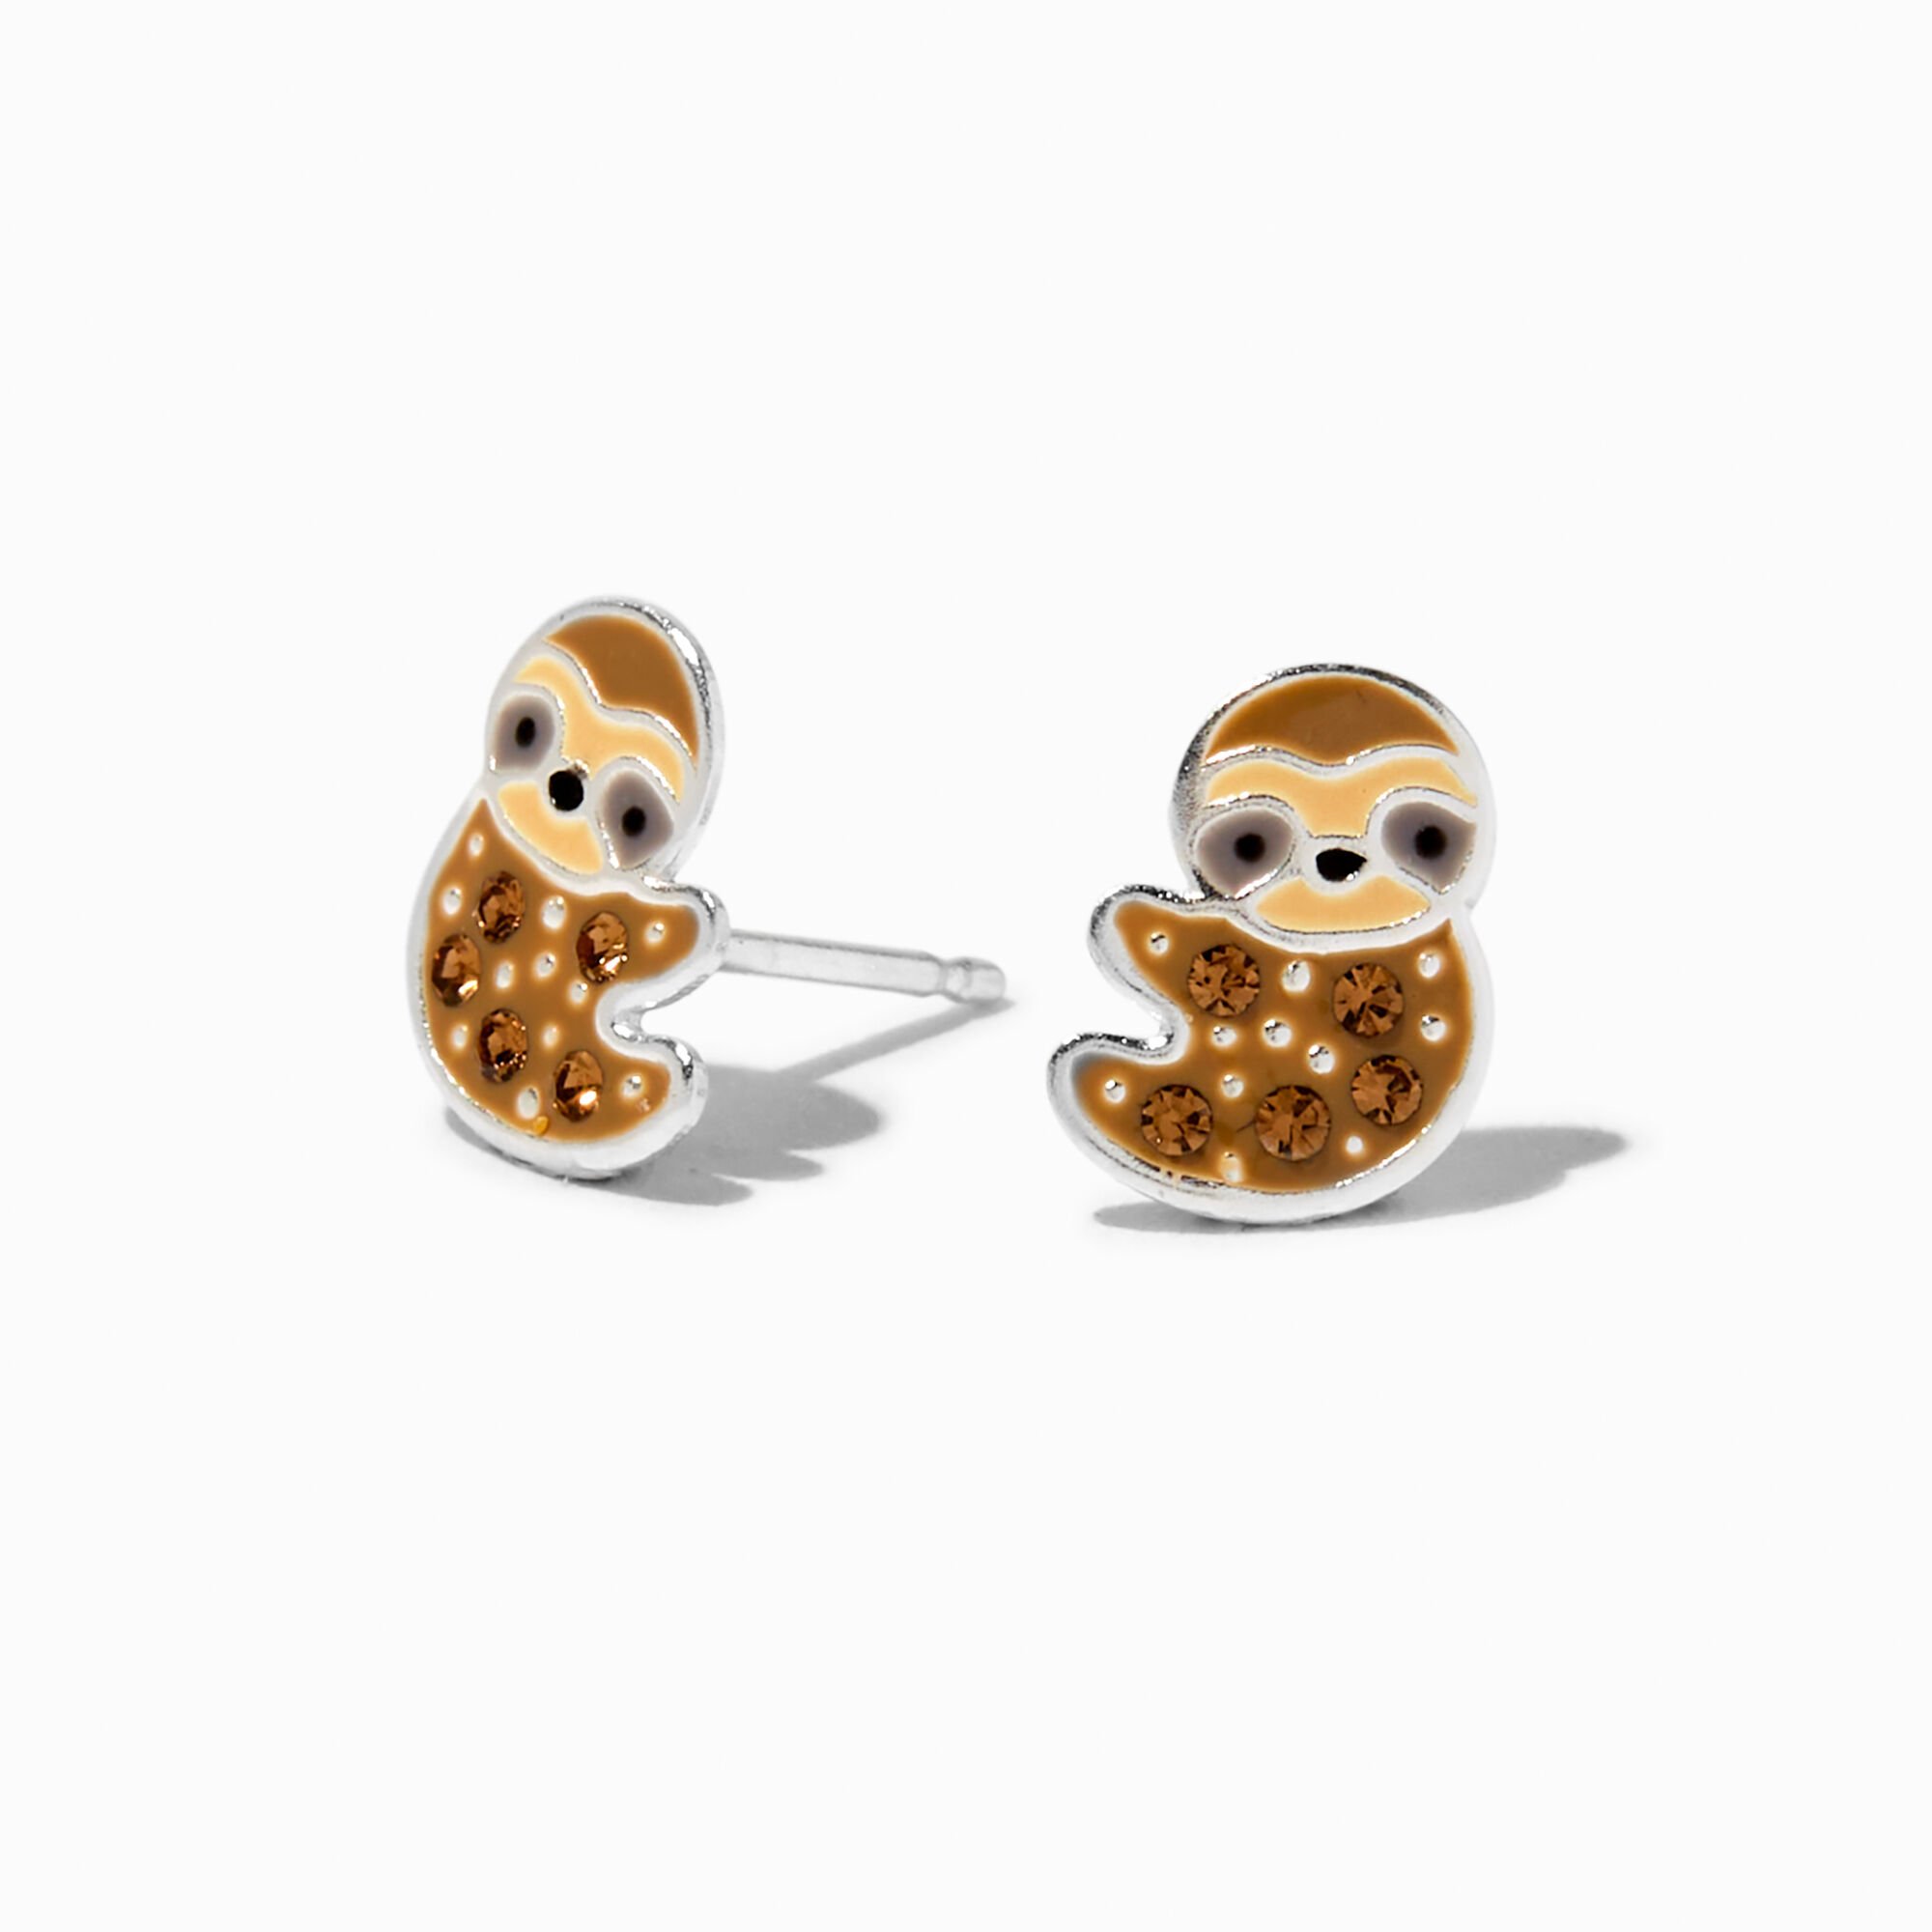 View Claires Crystal Sloth Stud Earrings Silver information